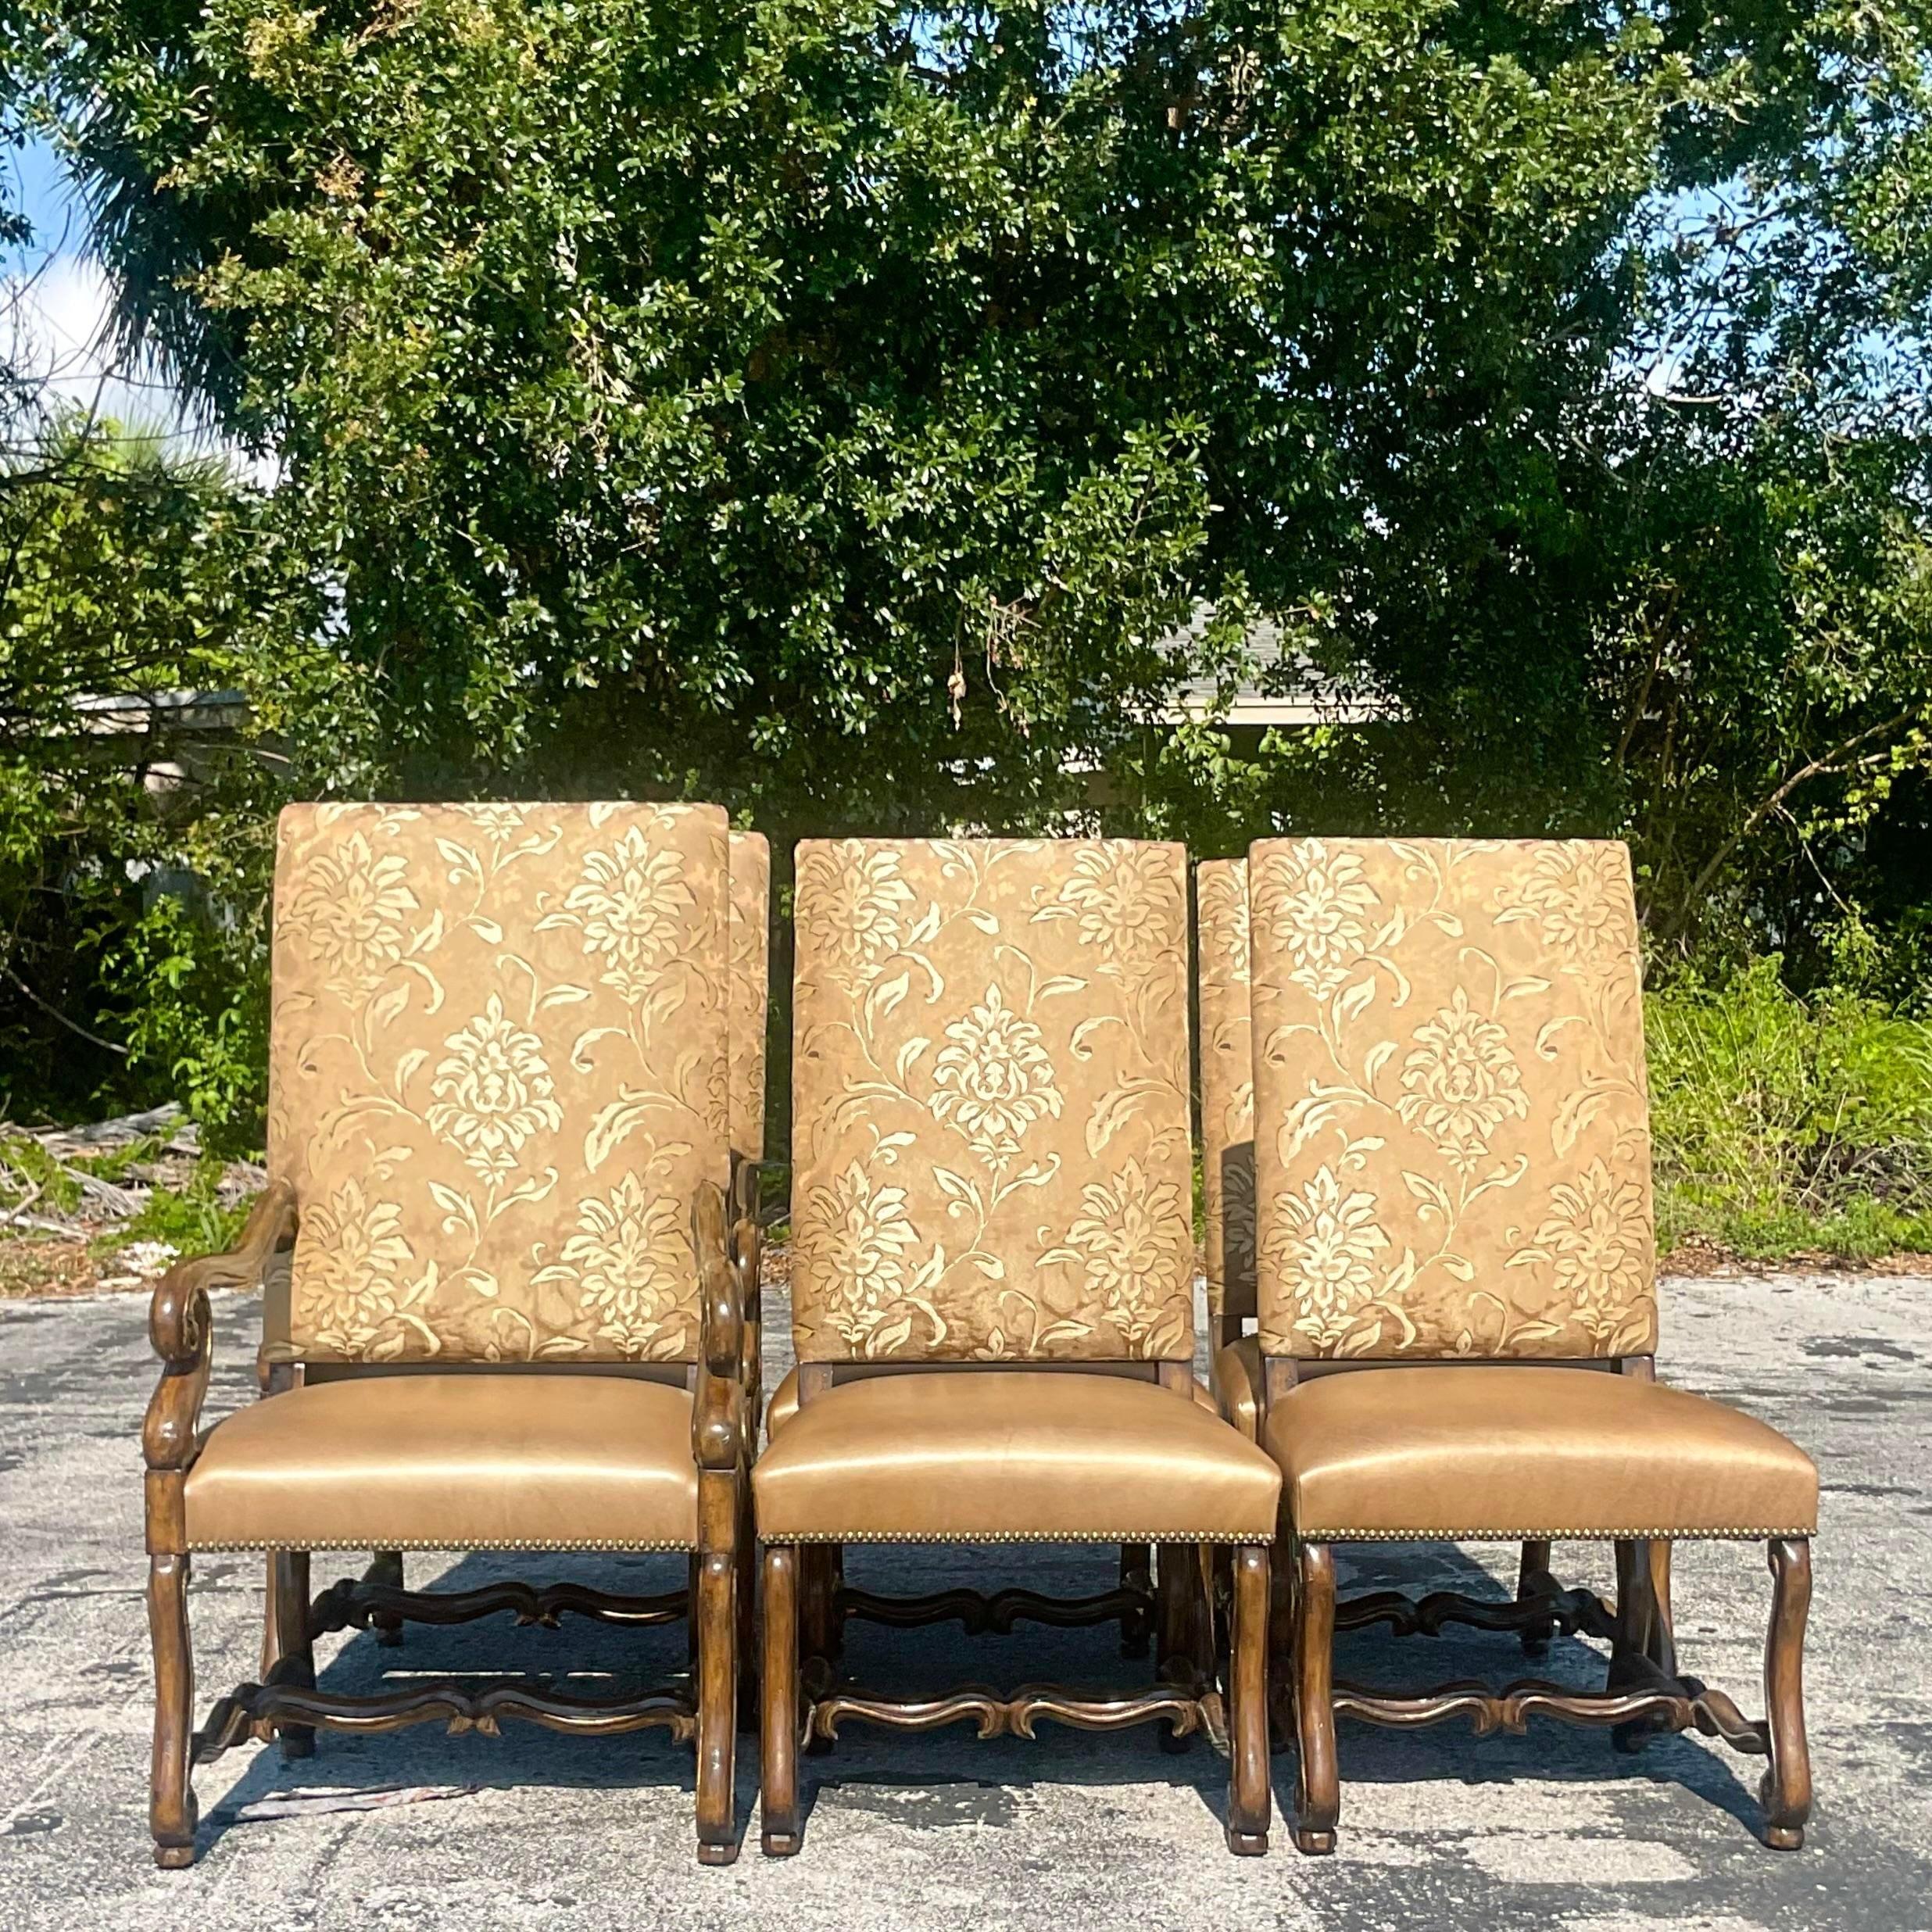 Vintage Boho Marge Carson’s High Back Leather and Brocade Dining Chairs, Set of 5